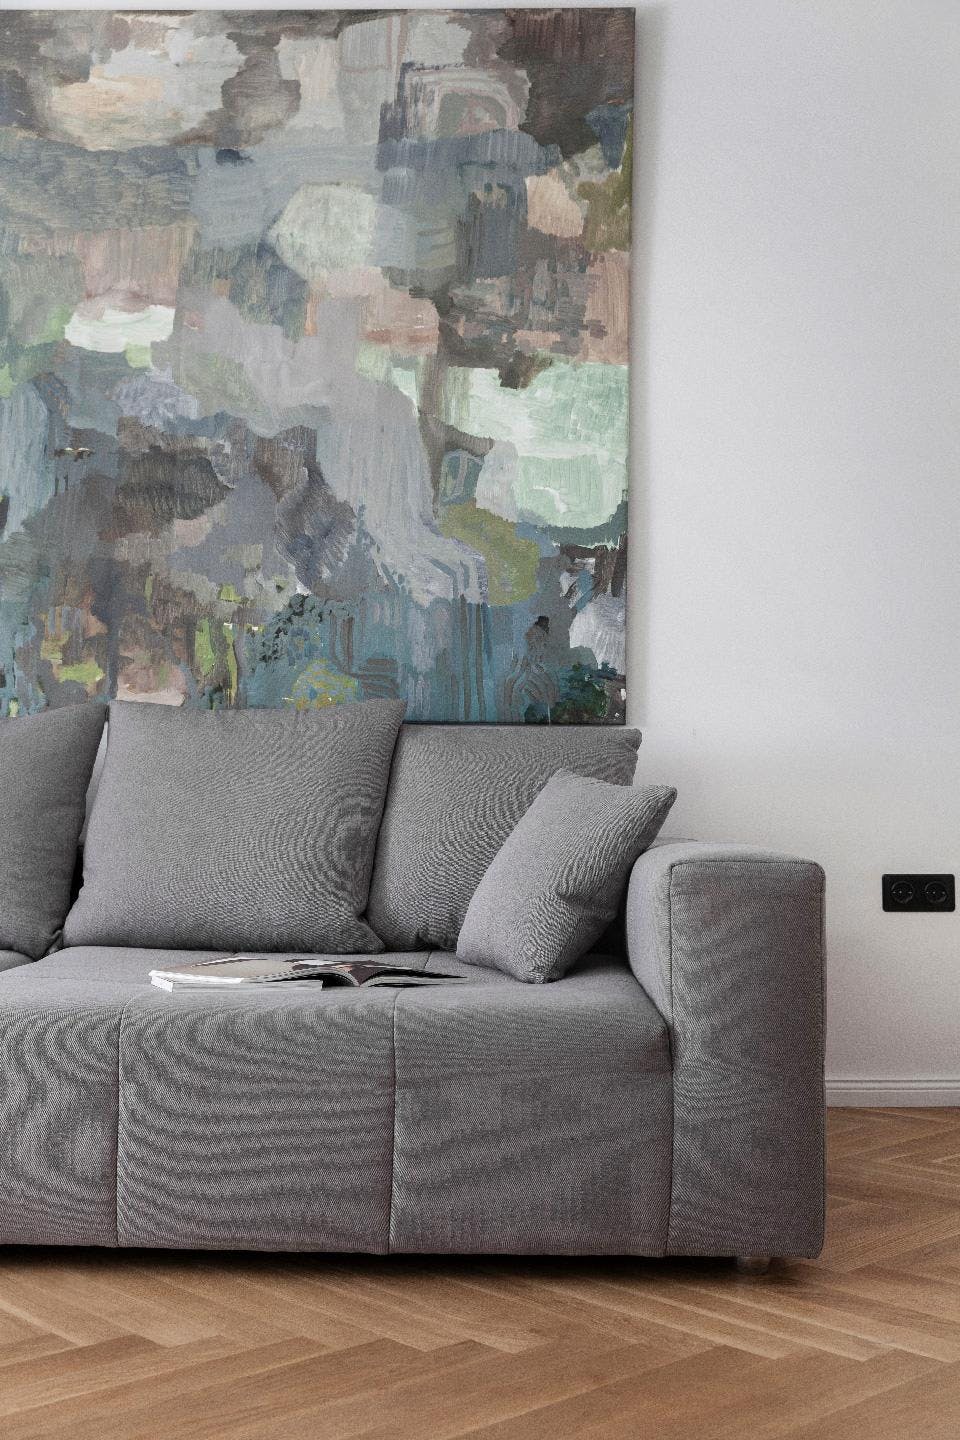 A gray couch is placed in a living room with a painting on the wall above it.